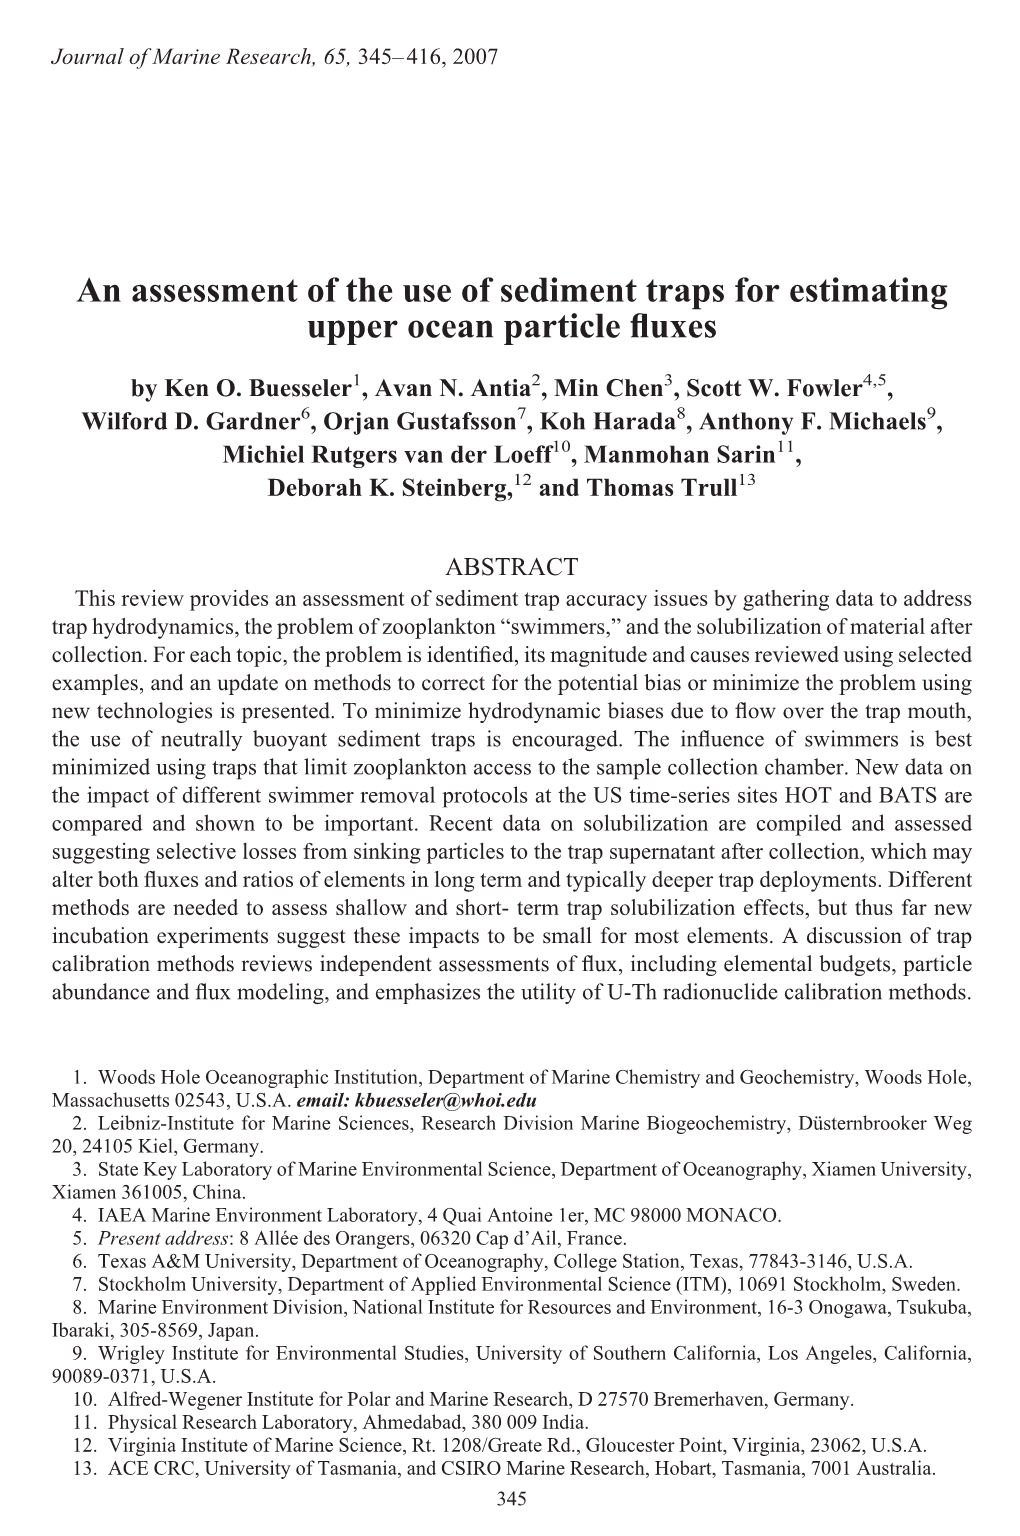 An Assessment of the Use of Sediment Traps for Estimating Upper Ocean Particle ﬂuxes